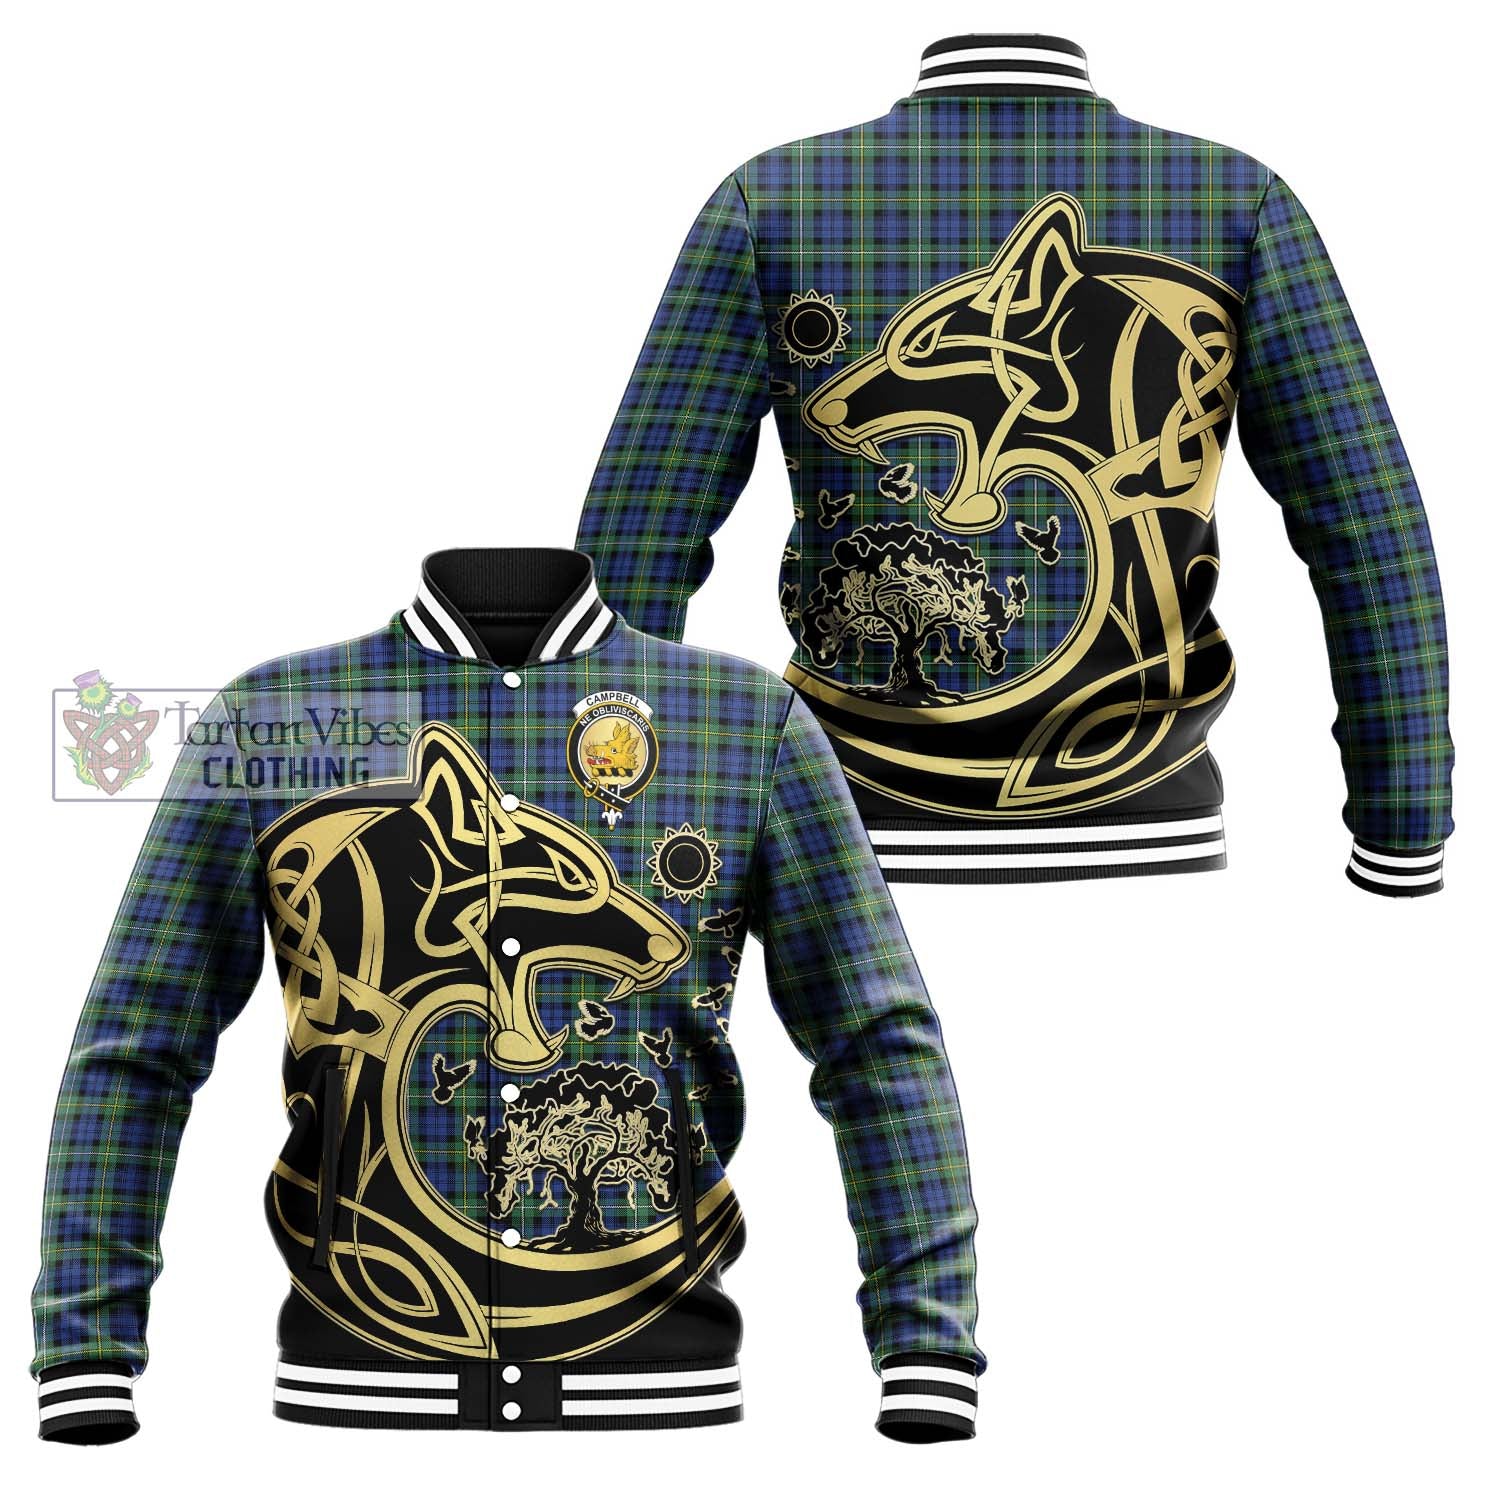 Tartan Vibes Clothing Campbell Argyll Ancient Tartan Baseball Jacket with Family Crest Celtic Wolf Style